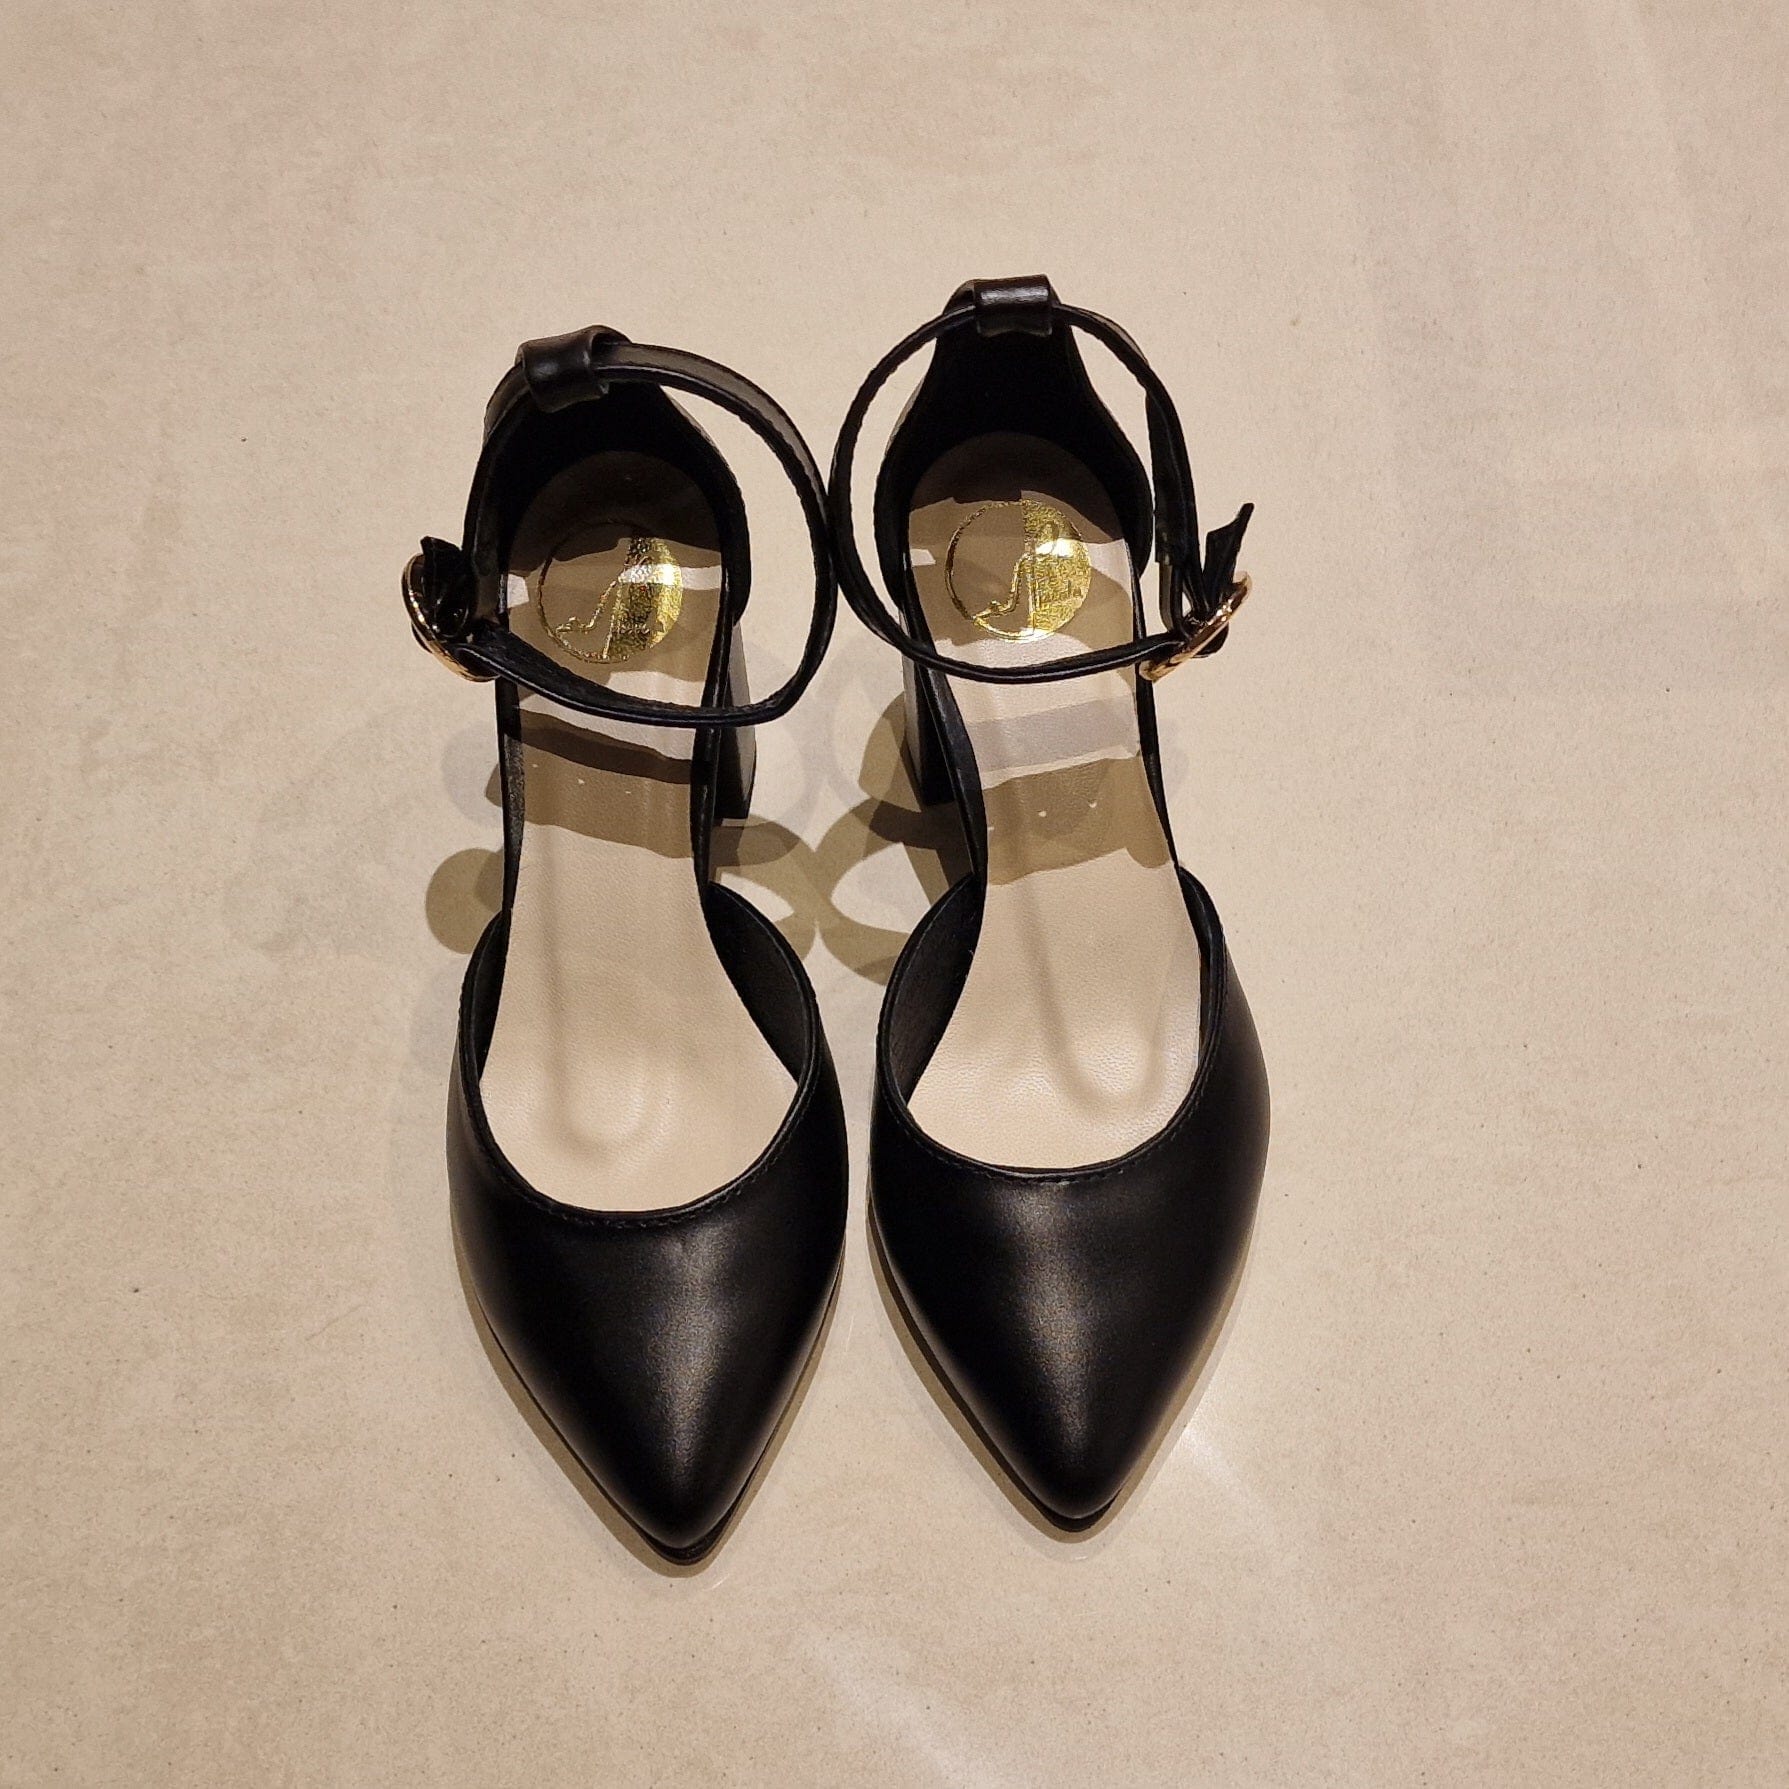 Pointed toe ankle strap small size court shoes